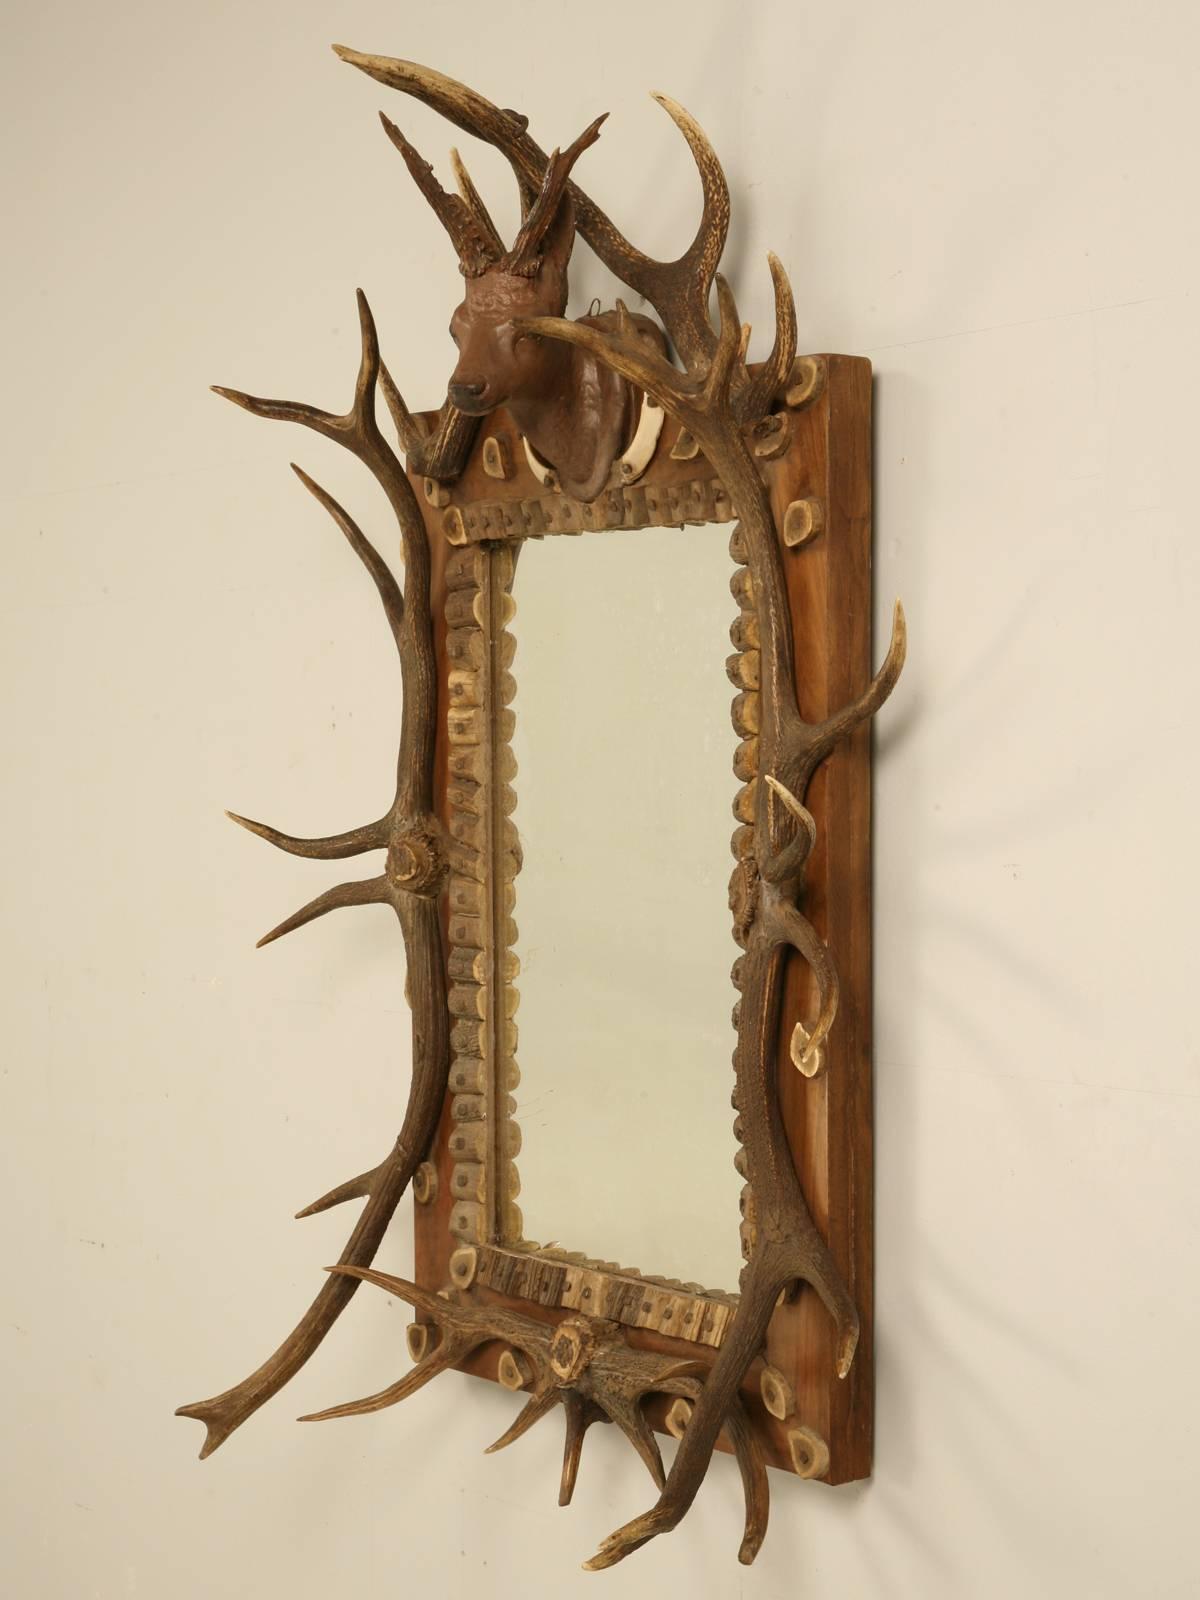 Antique Black Forest mirror with exceptional attention to detail from the European Red deer antlers on the perimeter, to the Eastern Roe Deer antlers for the center mount. The Russian Boar tusks flank the hand carved wooden deer head at the top